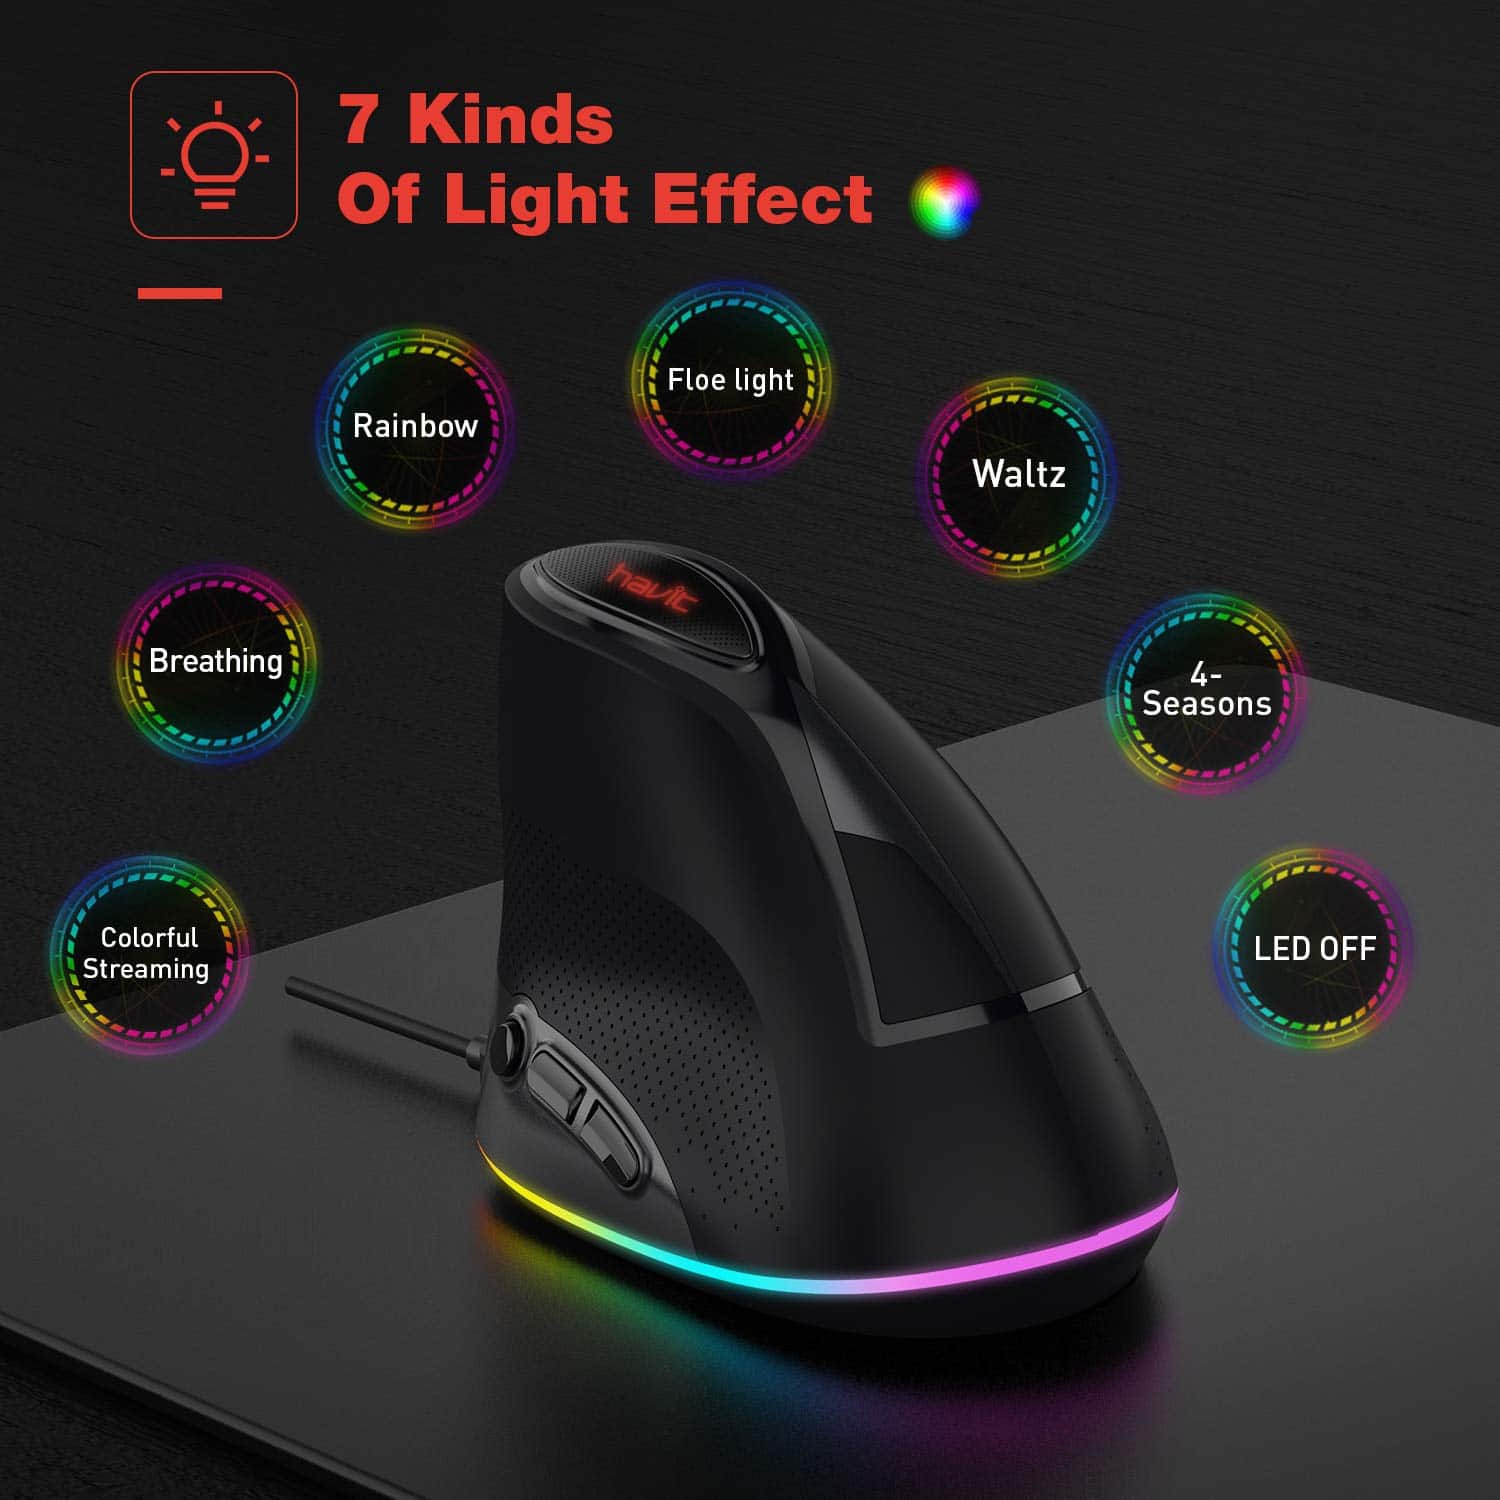 HAVIT HV-MS764 Wired Ergonomic Vertical Mouse with RGB Backlit